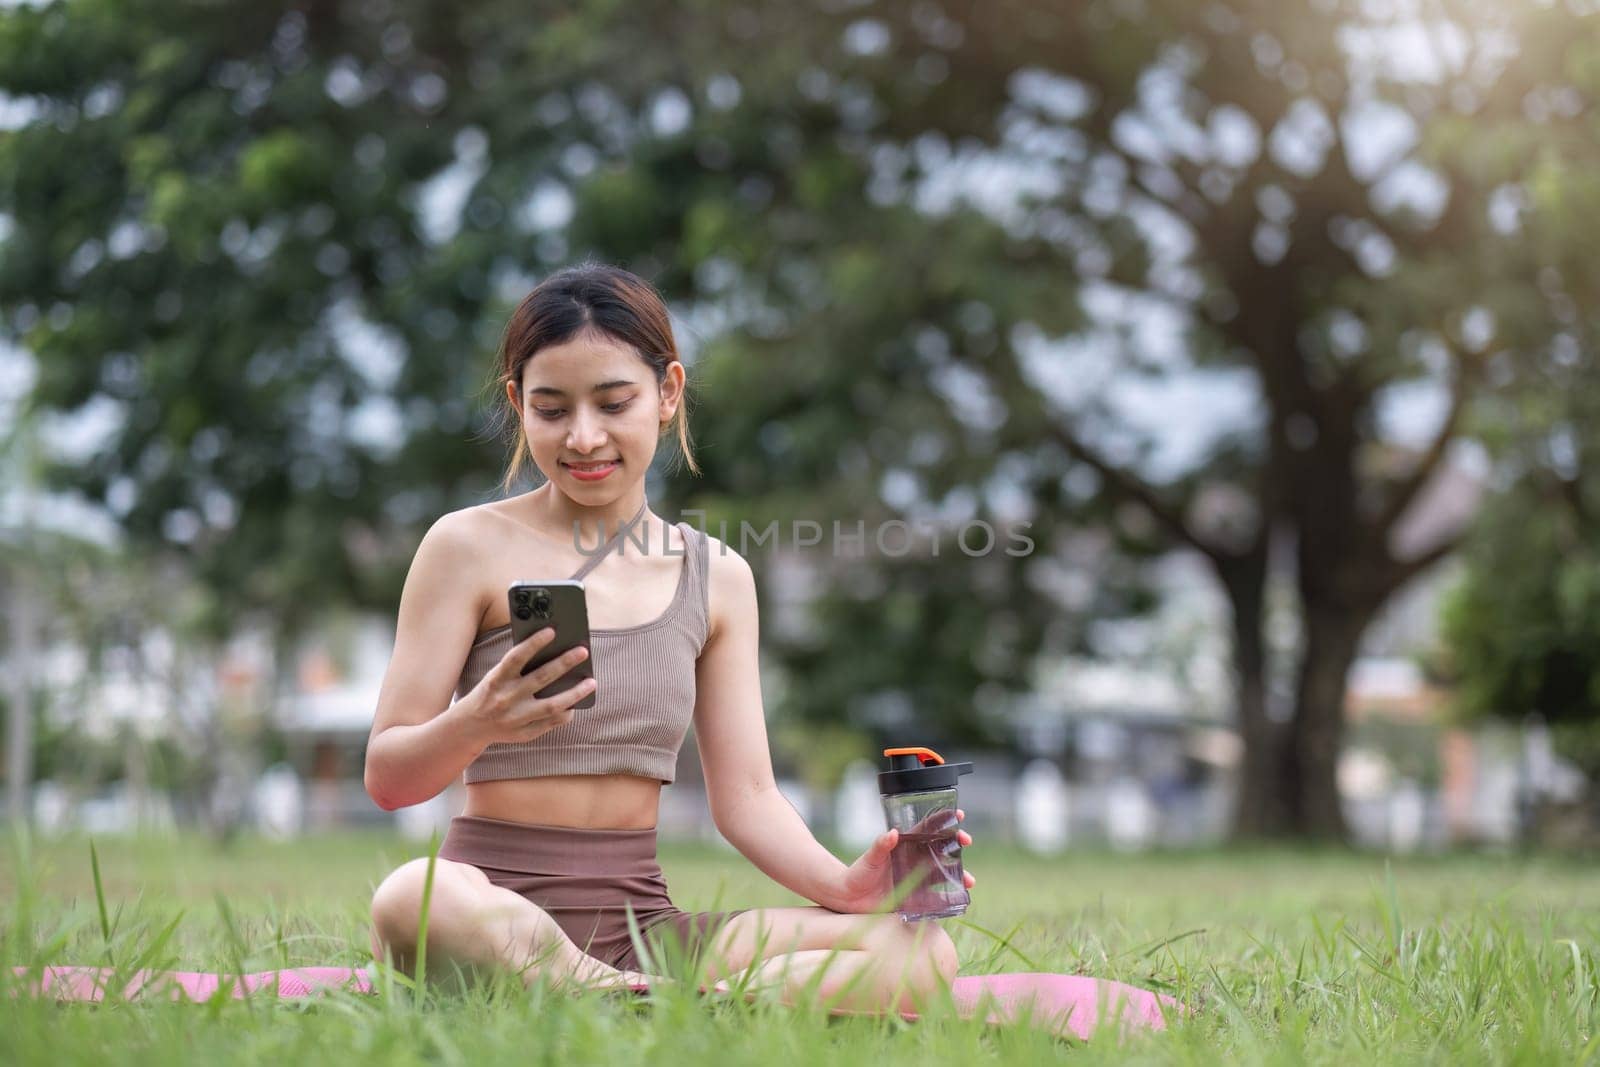 Young woman sitting on an exercise mat Use a smartphone during an outdoor yoga activity on the grass at a park..